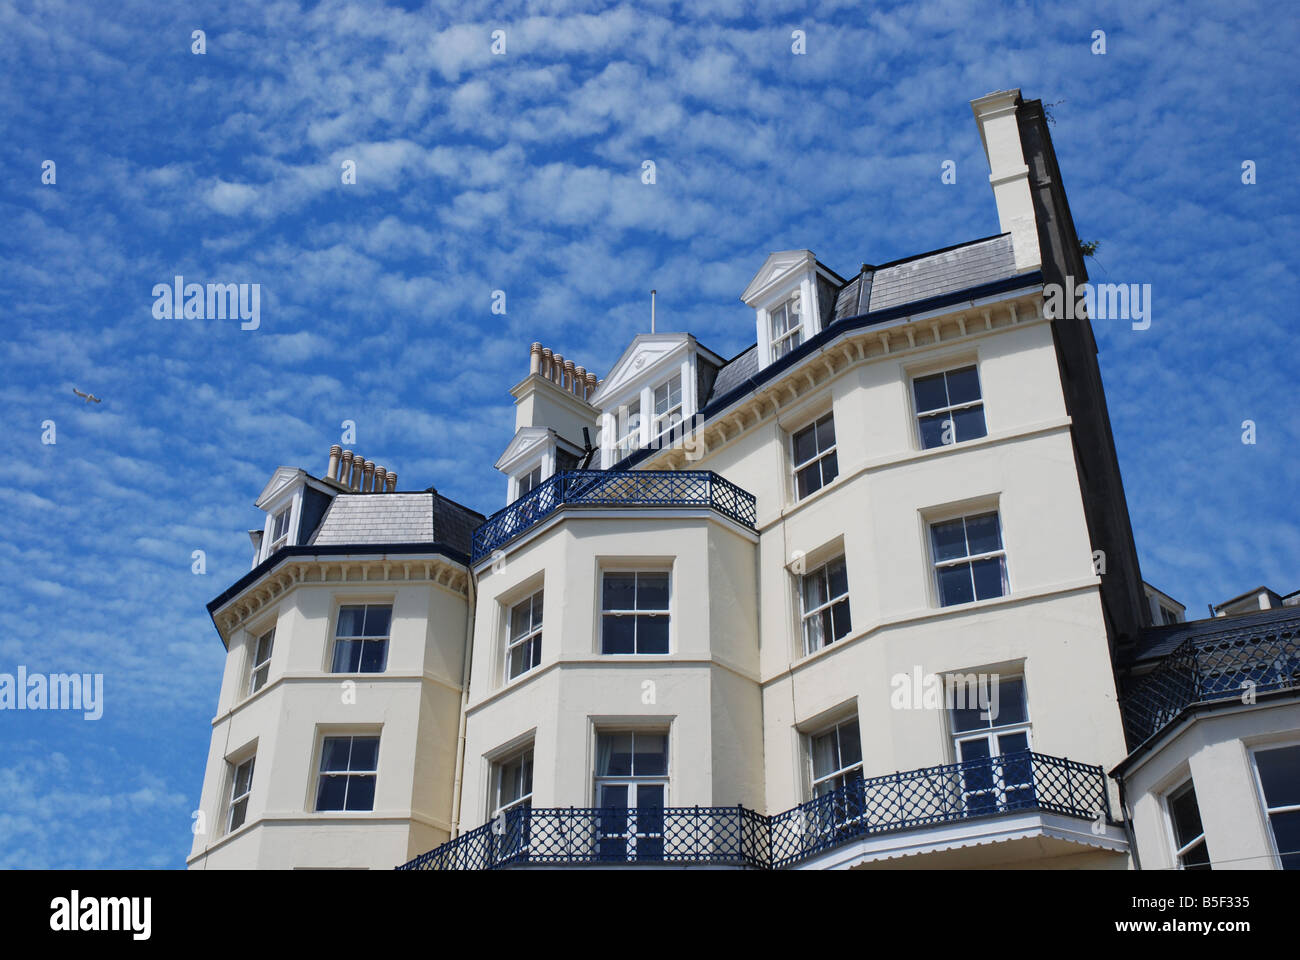 Seaside property in Eastbourne, East Sussex. Stock Photo